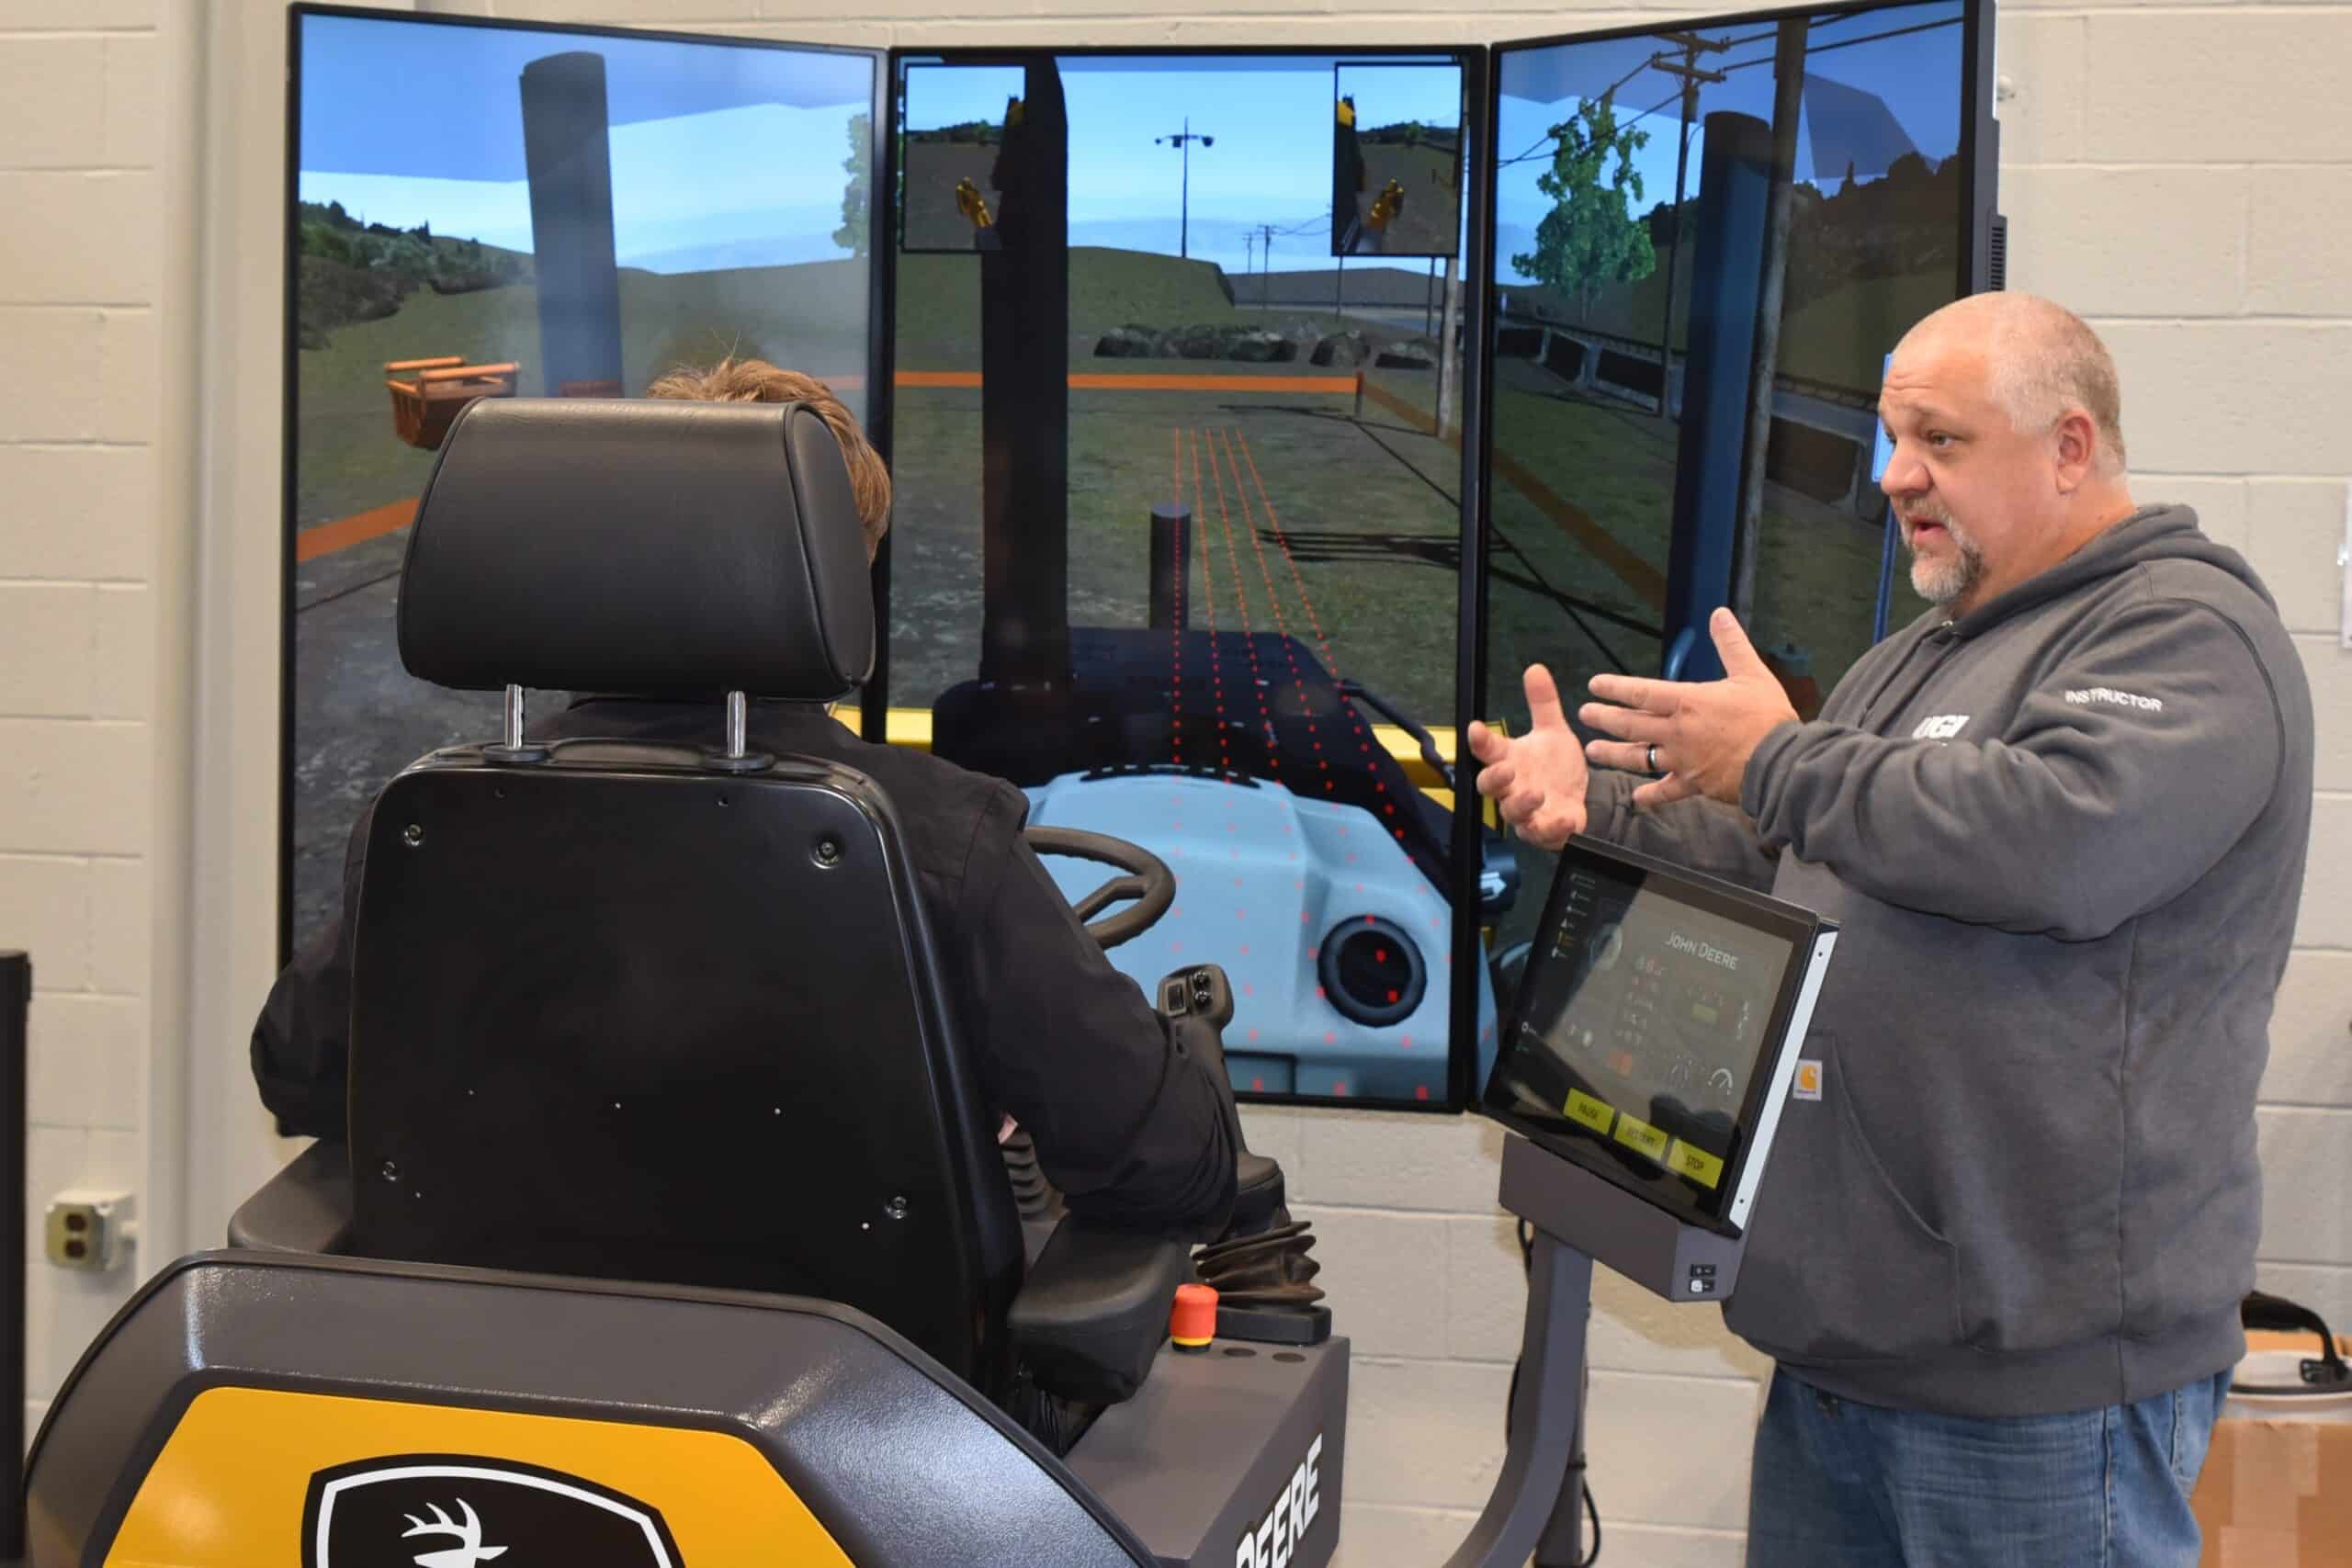 UGI employee teaching student about UGI's use of the driving simulator student is sitting on which is used to train UGI construction employees